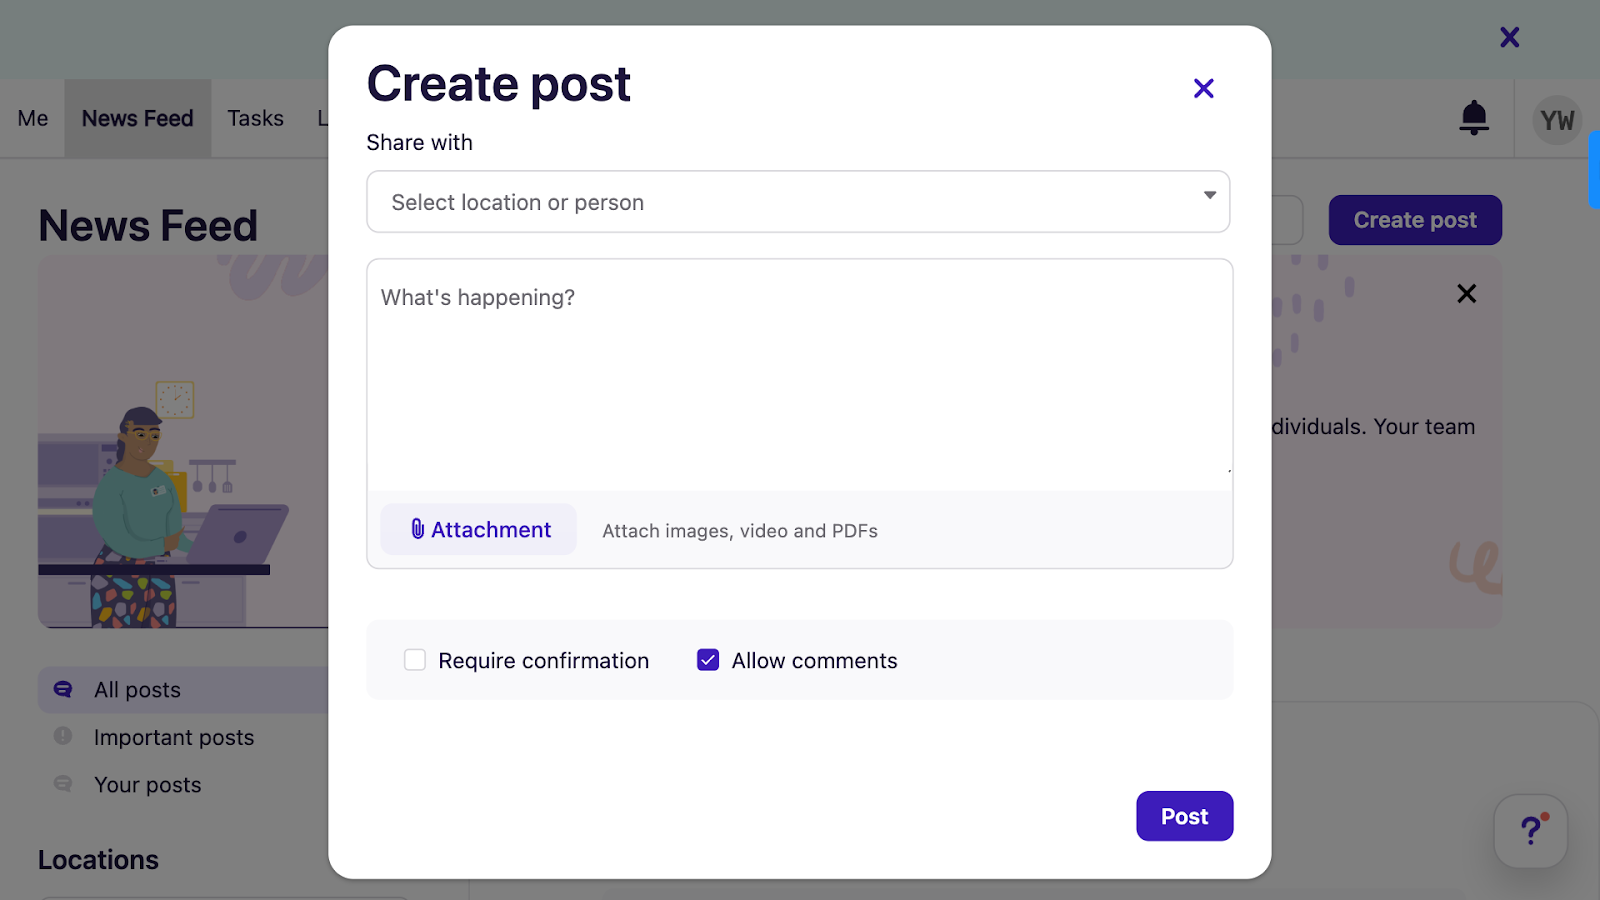 Deputy’s newsfeed lets you create a new post to share with a location or person, add attachments, require confirmation, and adjust commenting permissions. 